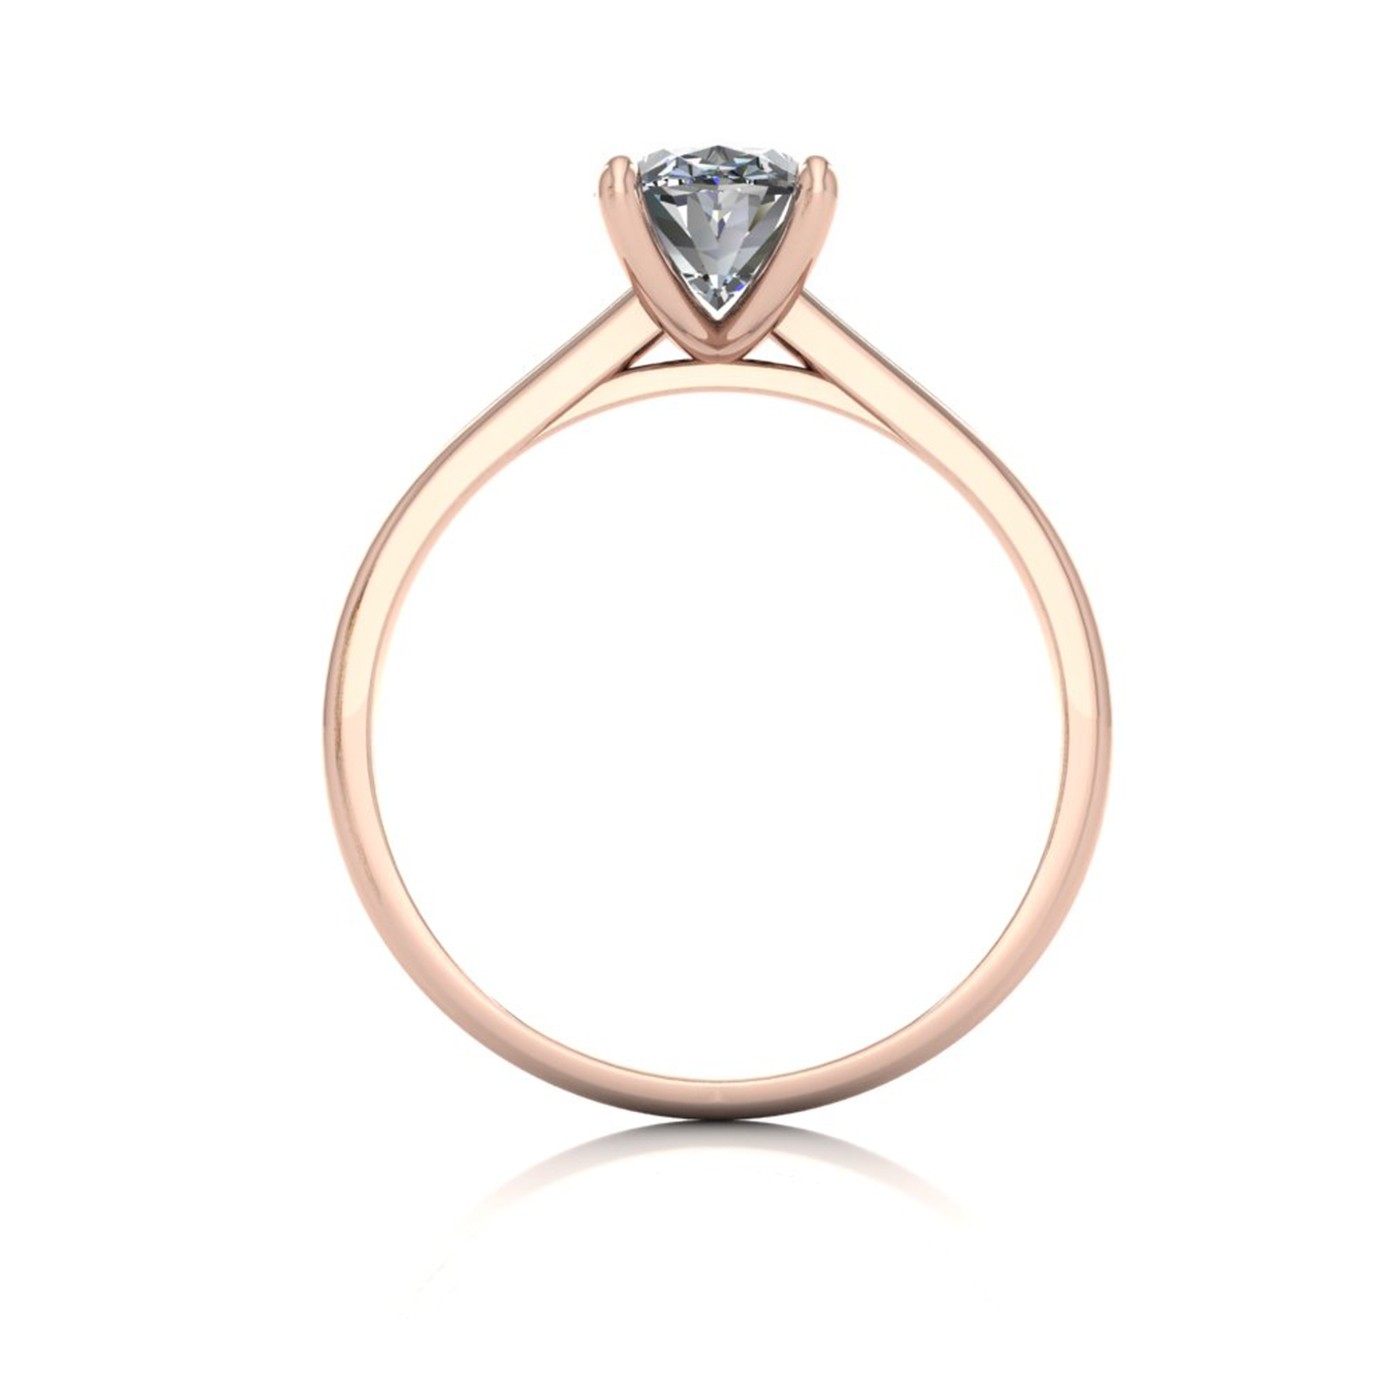 18k rose gold  1,20 ct 4 prongs solitaire oval cut diamond engagement ring with whisper thin band